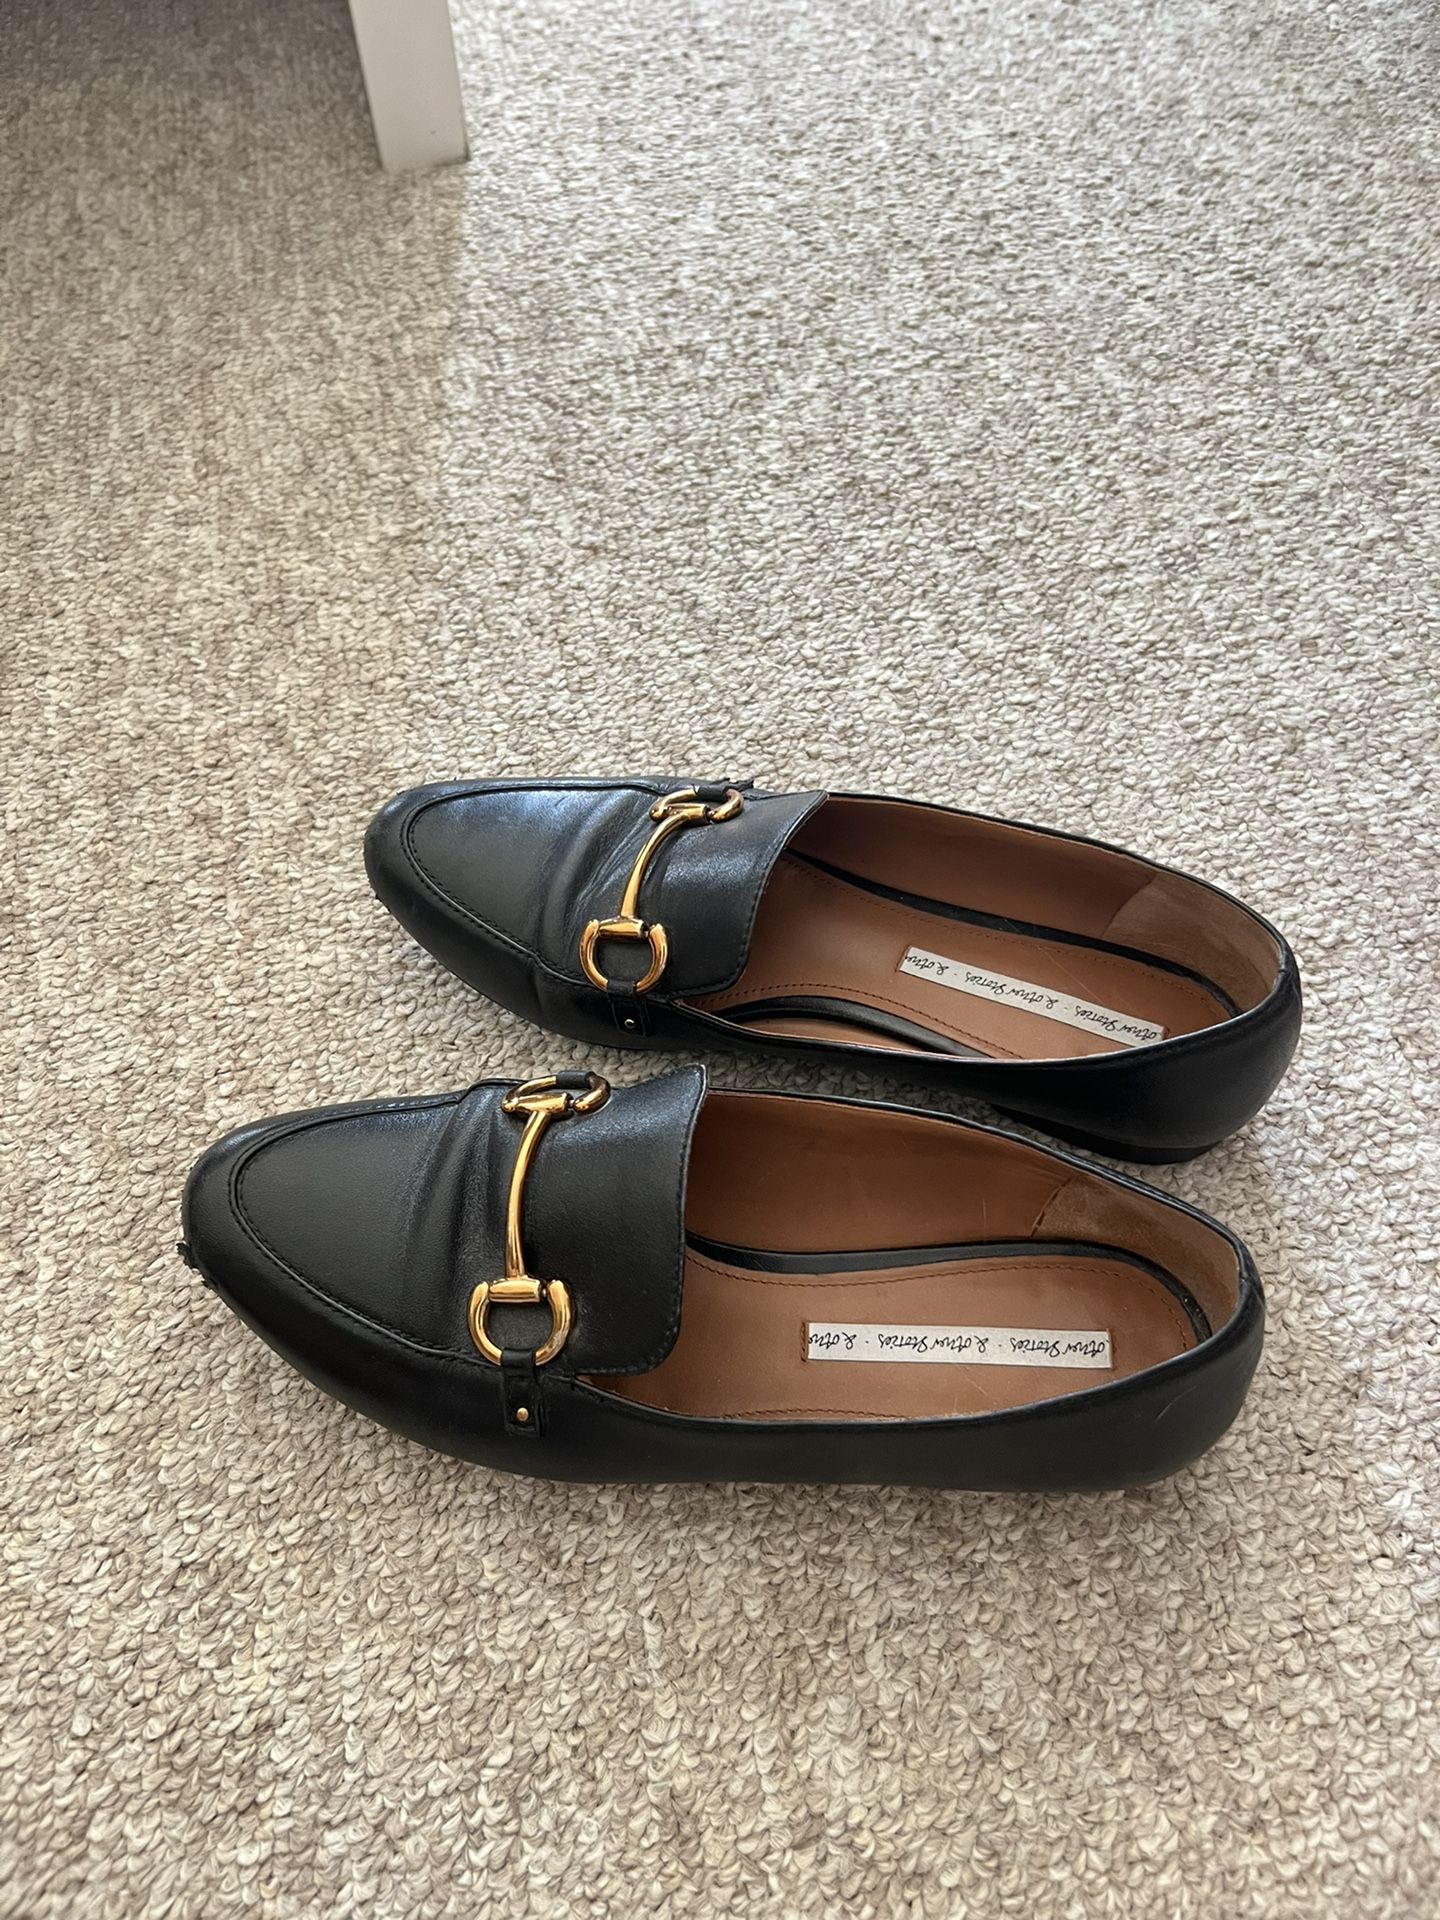 & Other Stories Equestrian Buckle Loafers